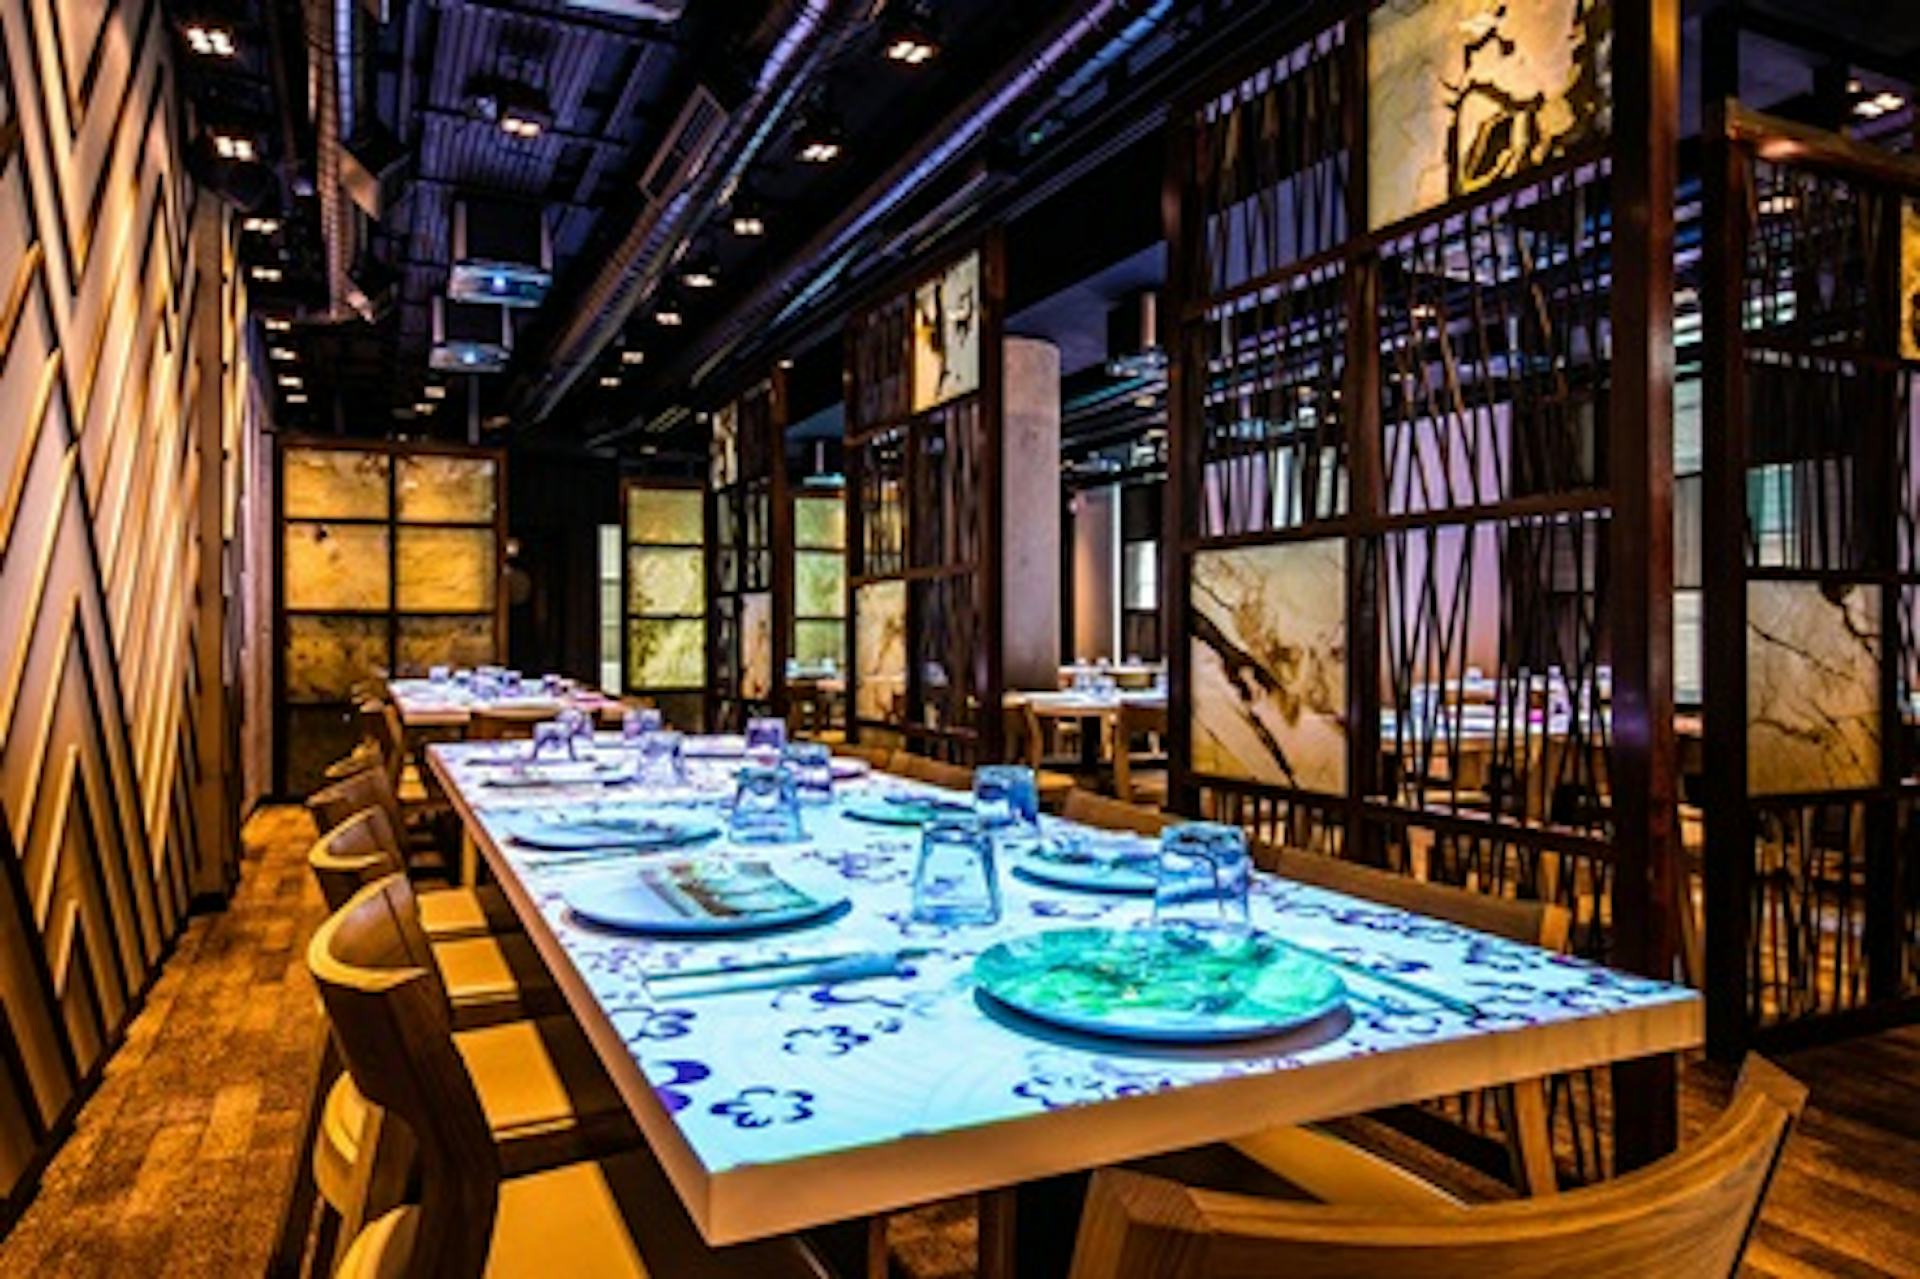 Unlimited Asian Tapas and Sushi for Two at inamo